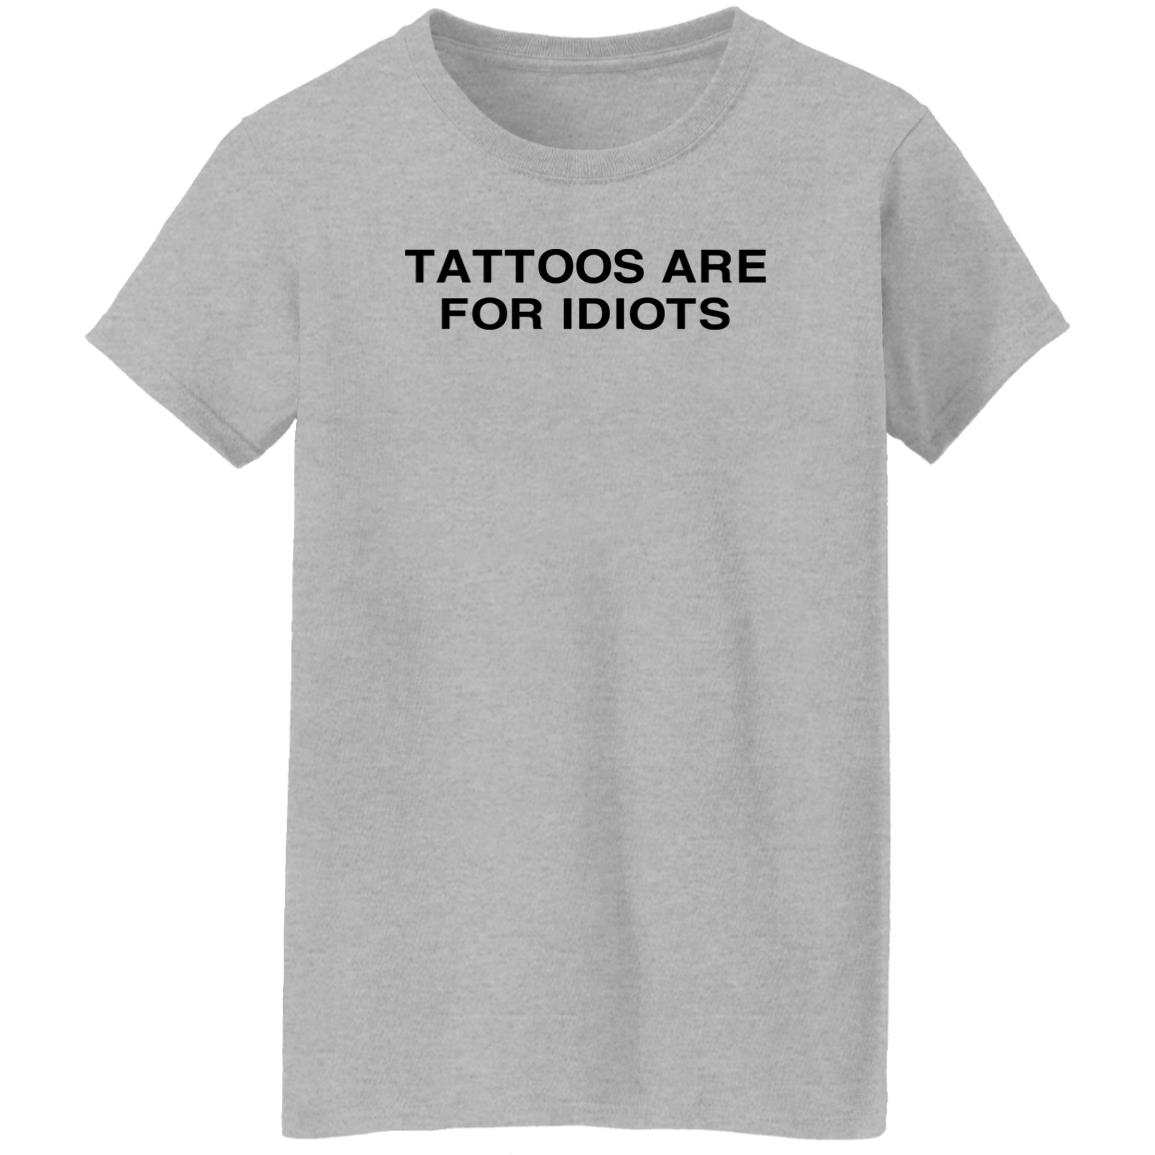 Tradstickydesign Tattoos Are For Idiots Shirt